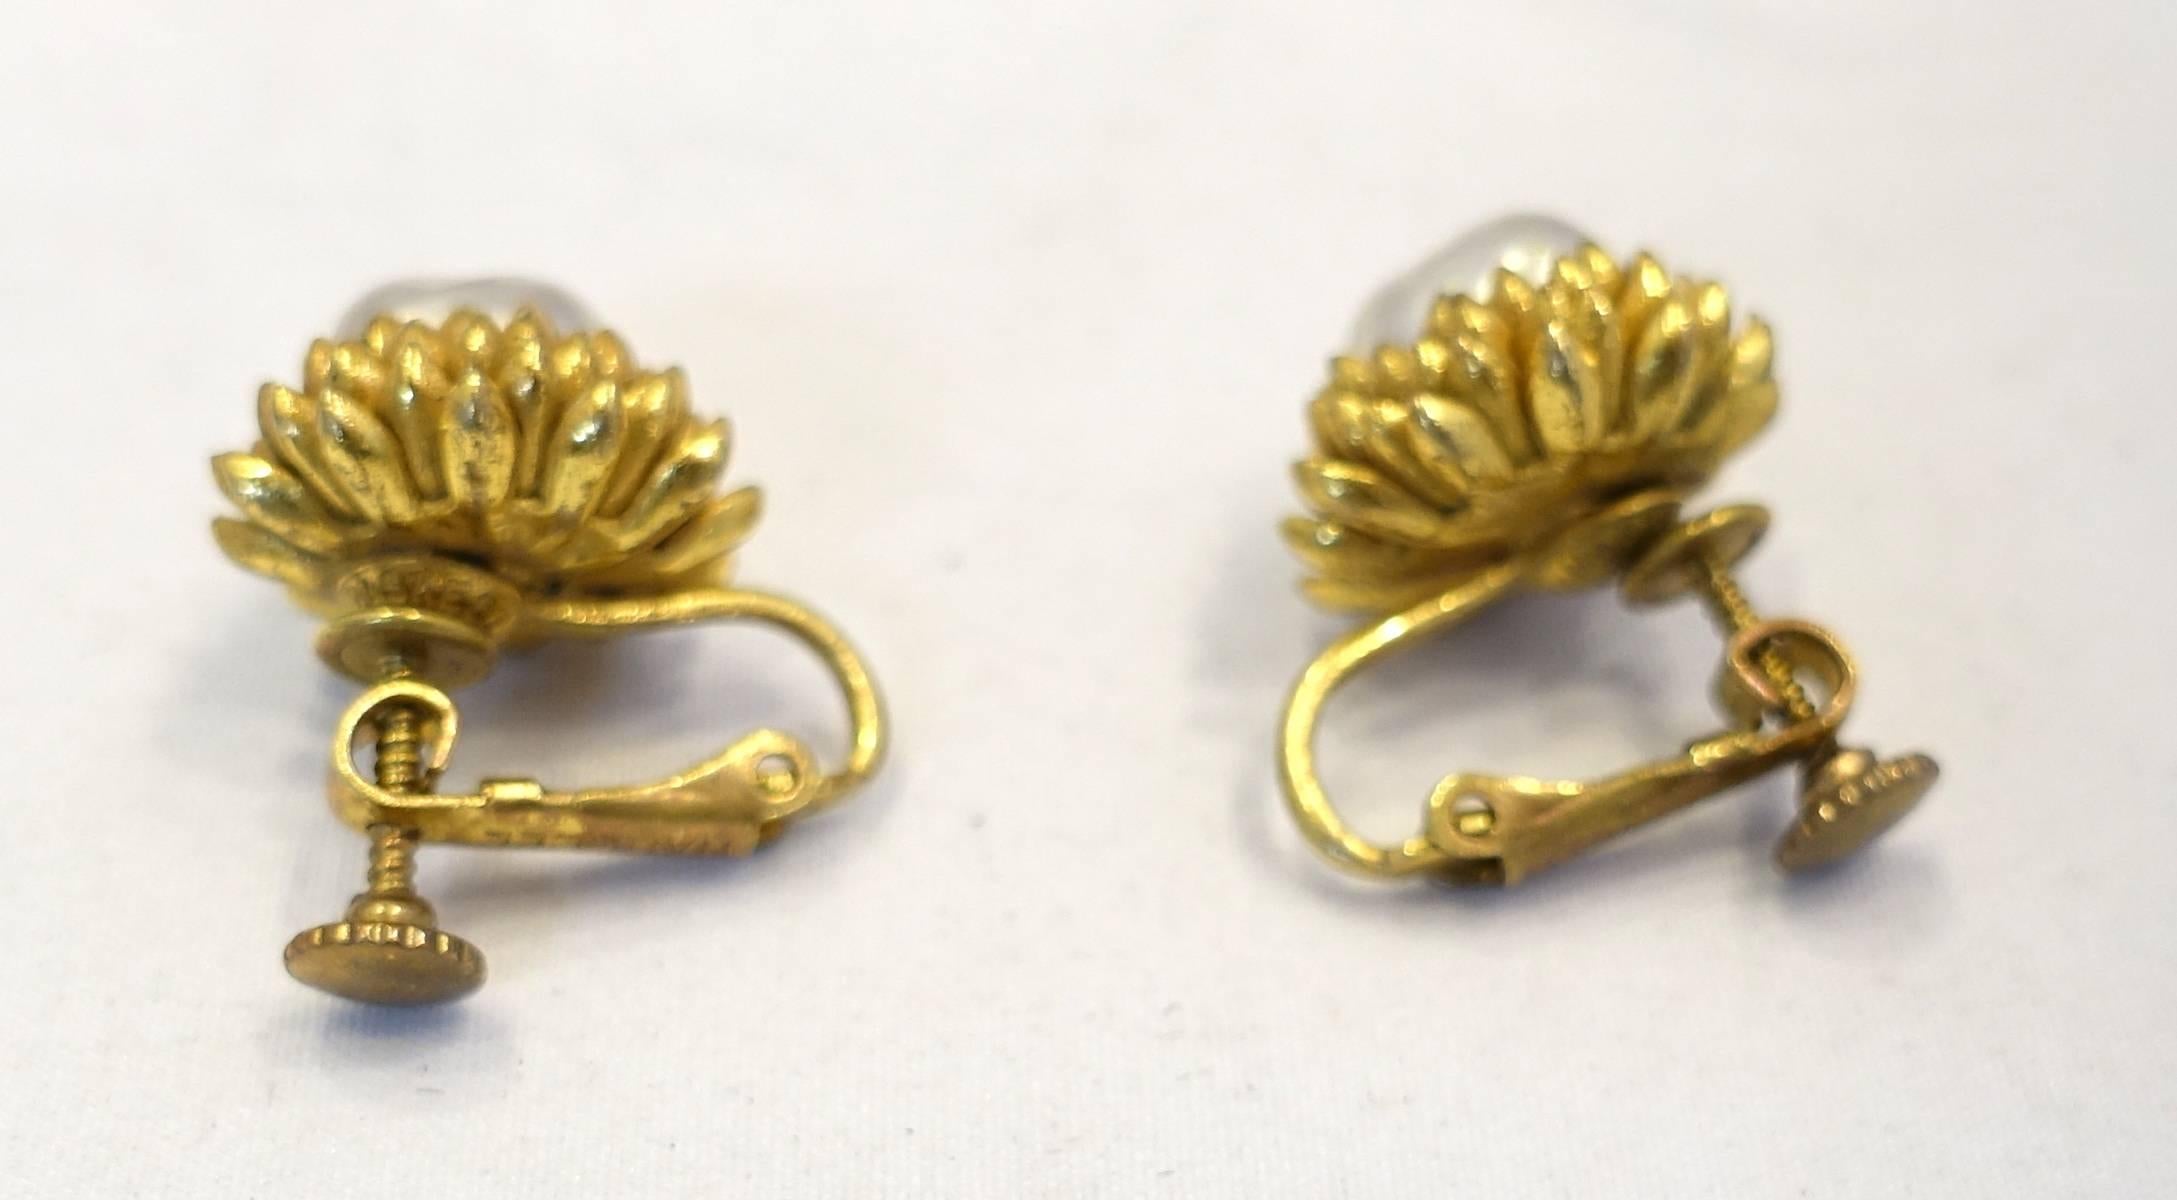 Whenever I find these Haskell earrings, I must have them.  They are Haskell’s famous acorn earrings. These vintage signed Miriam Haskell earrings feature faux pearls in a gold-tone setting.  These clip earrings measure 5/8” across, are signed